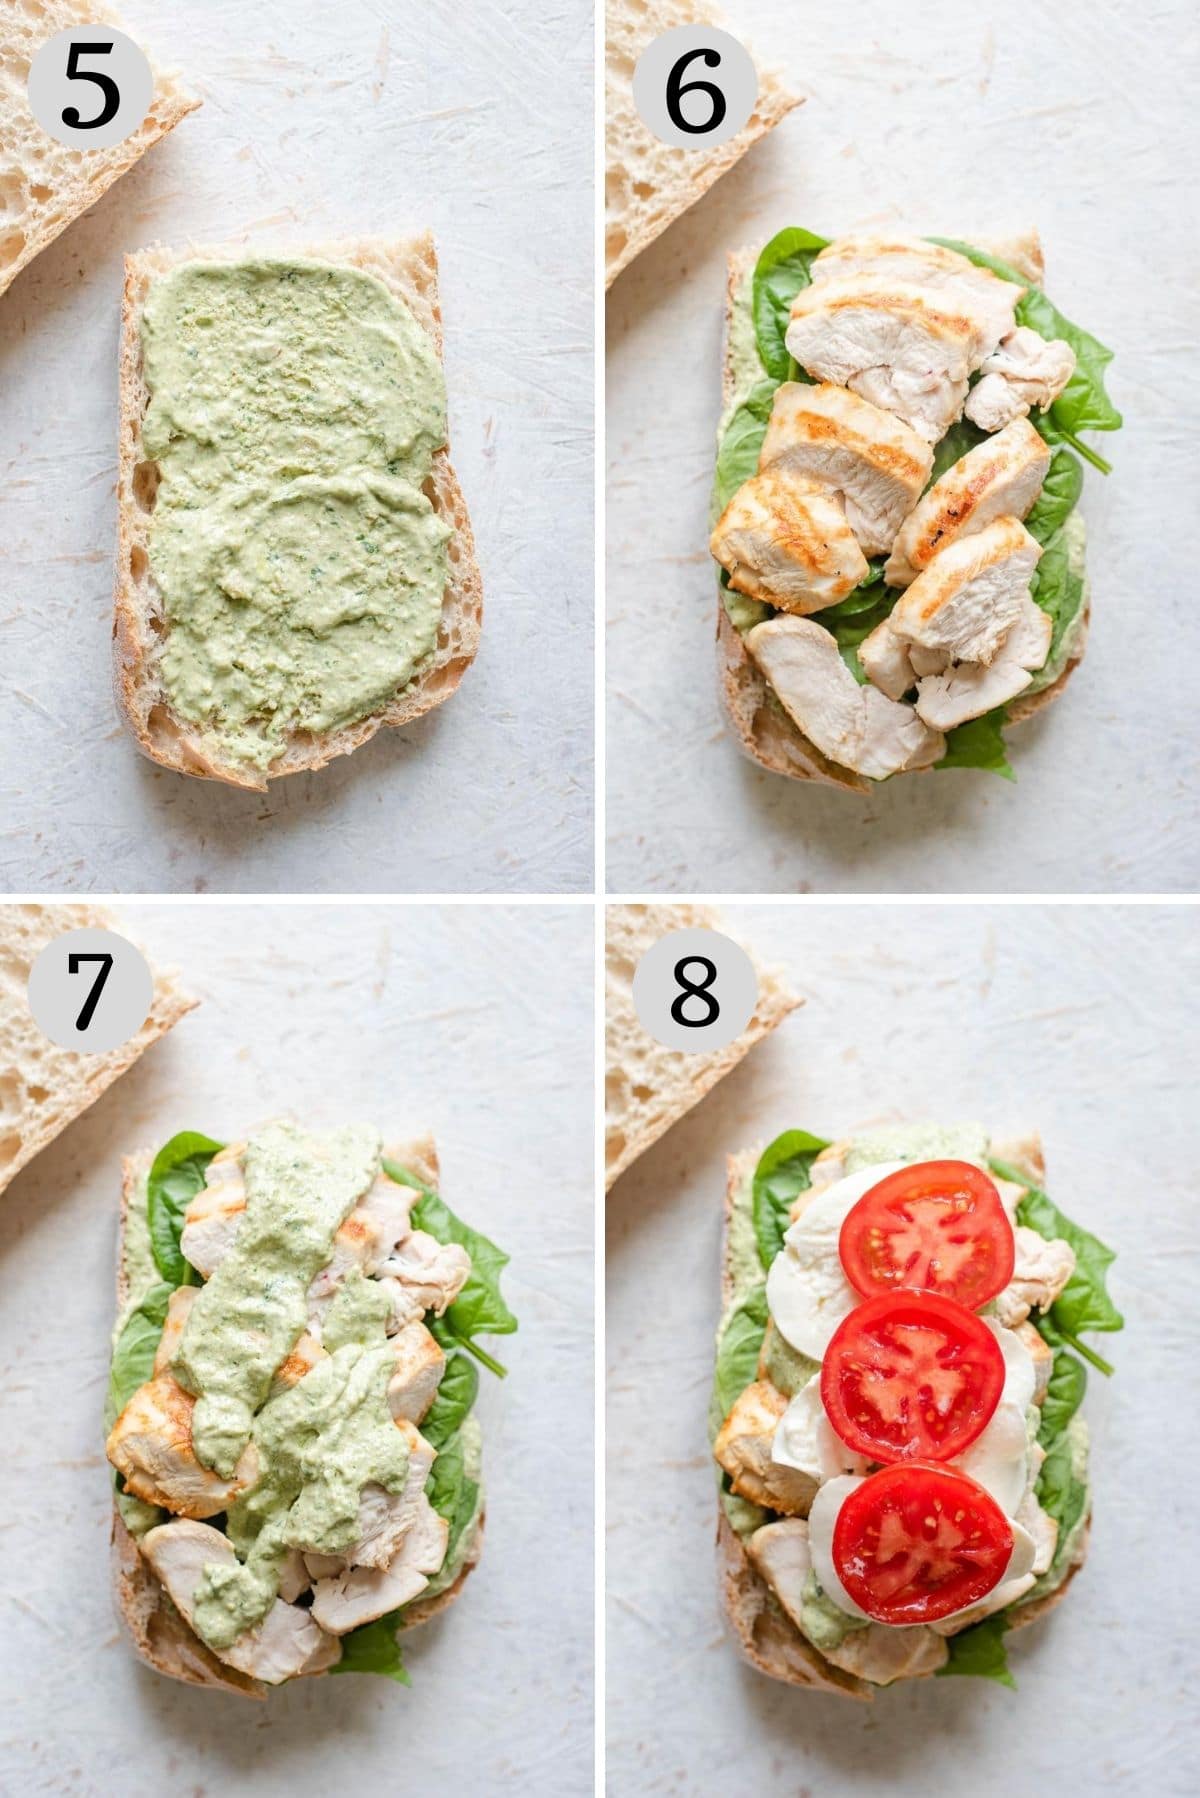 Step by step photos showing how to assemble a chicken ciabatta